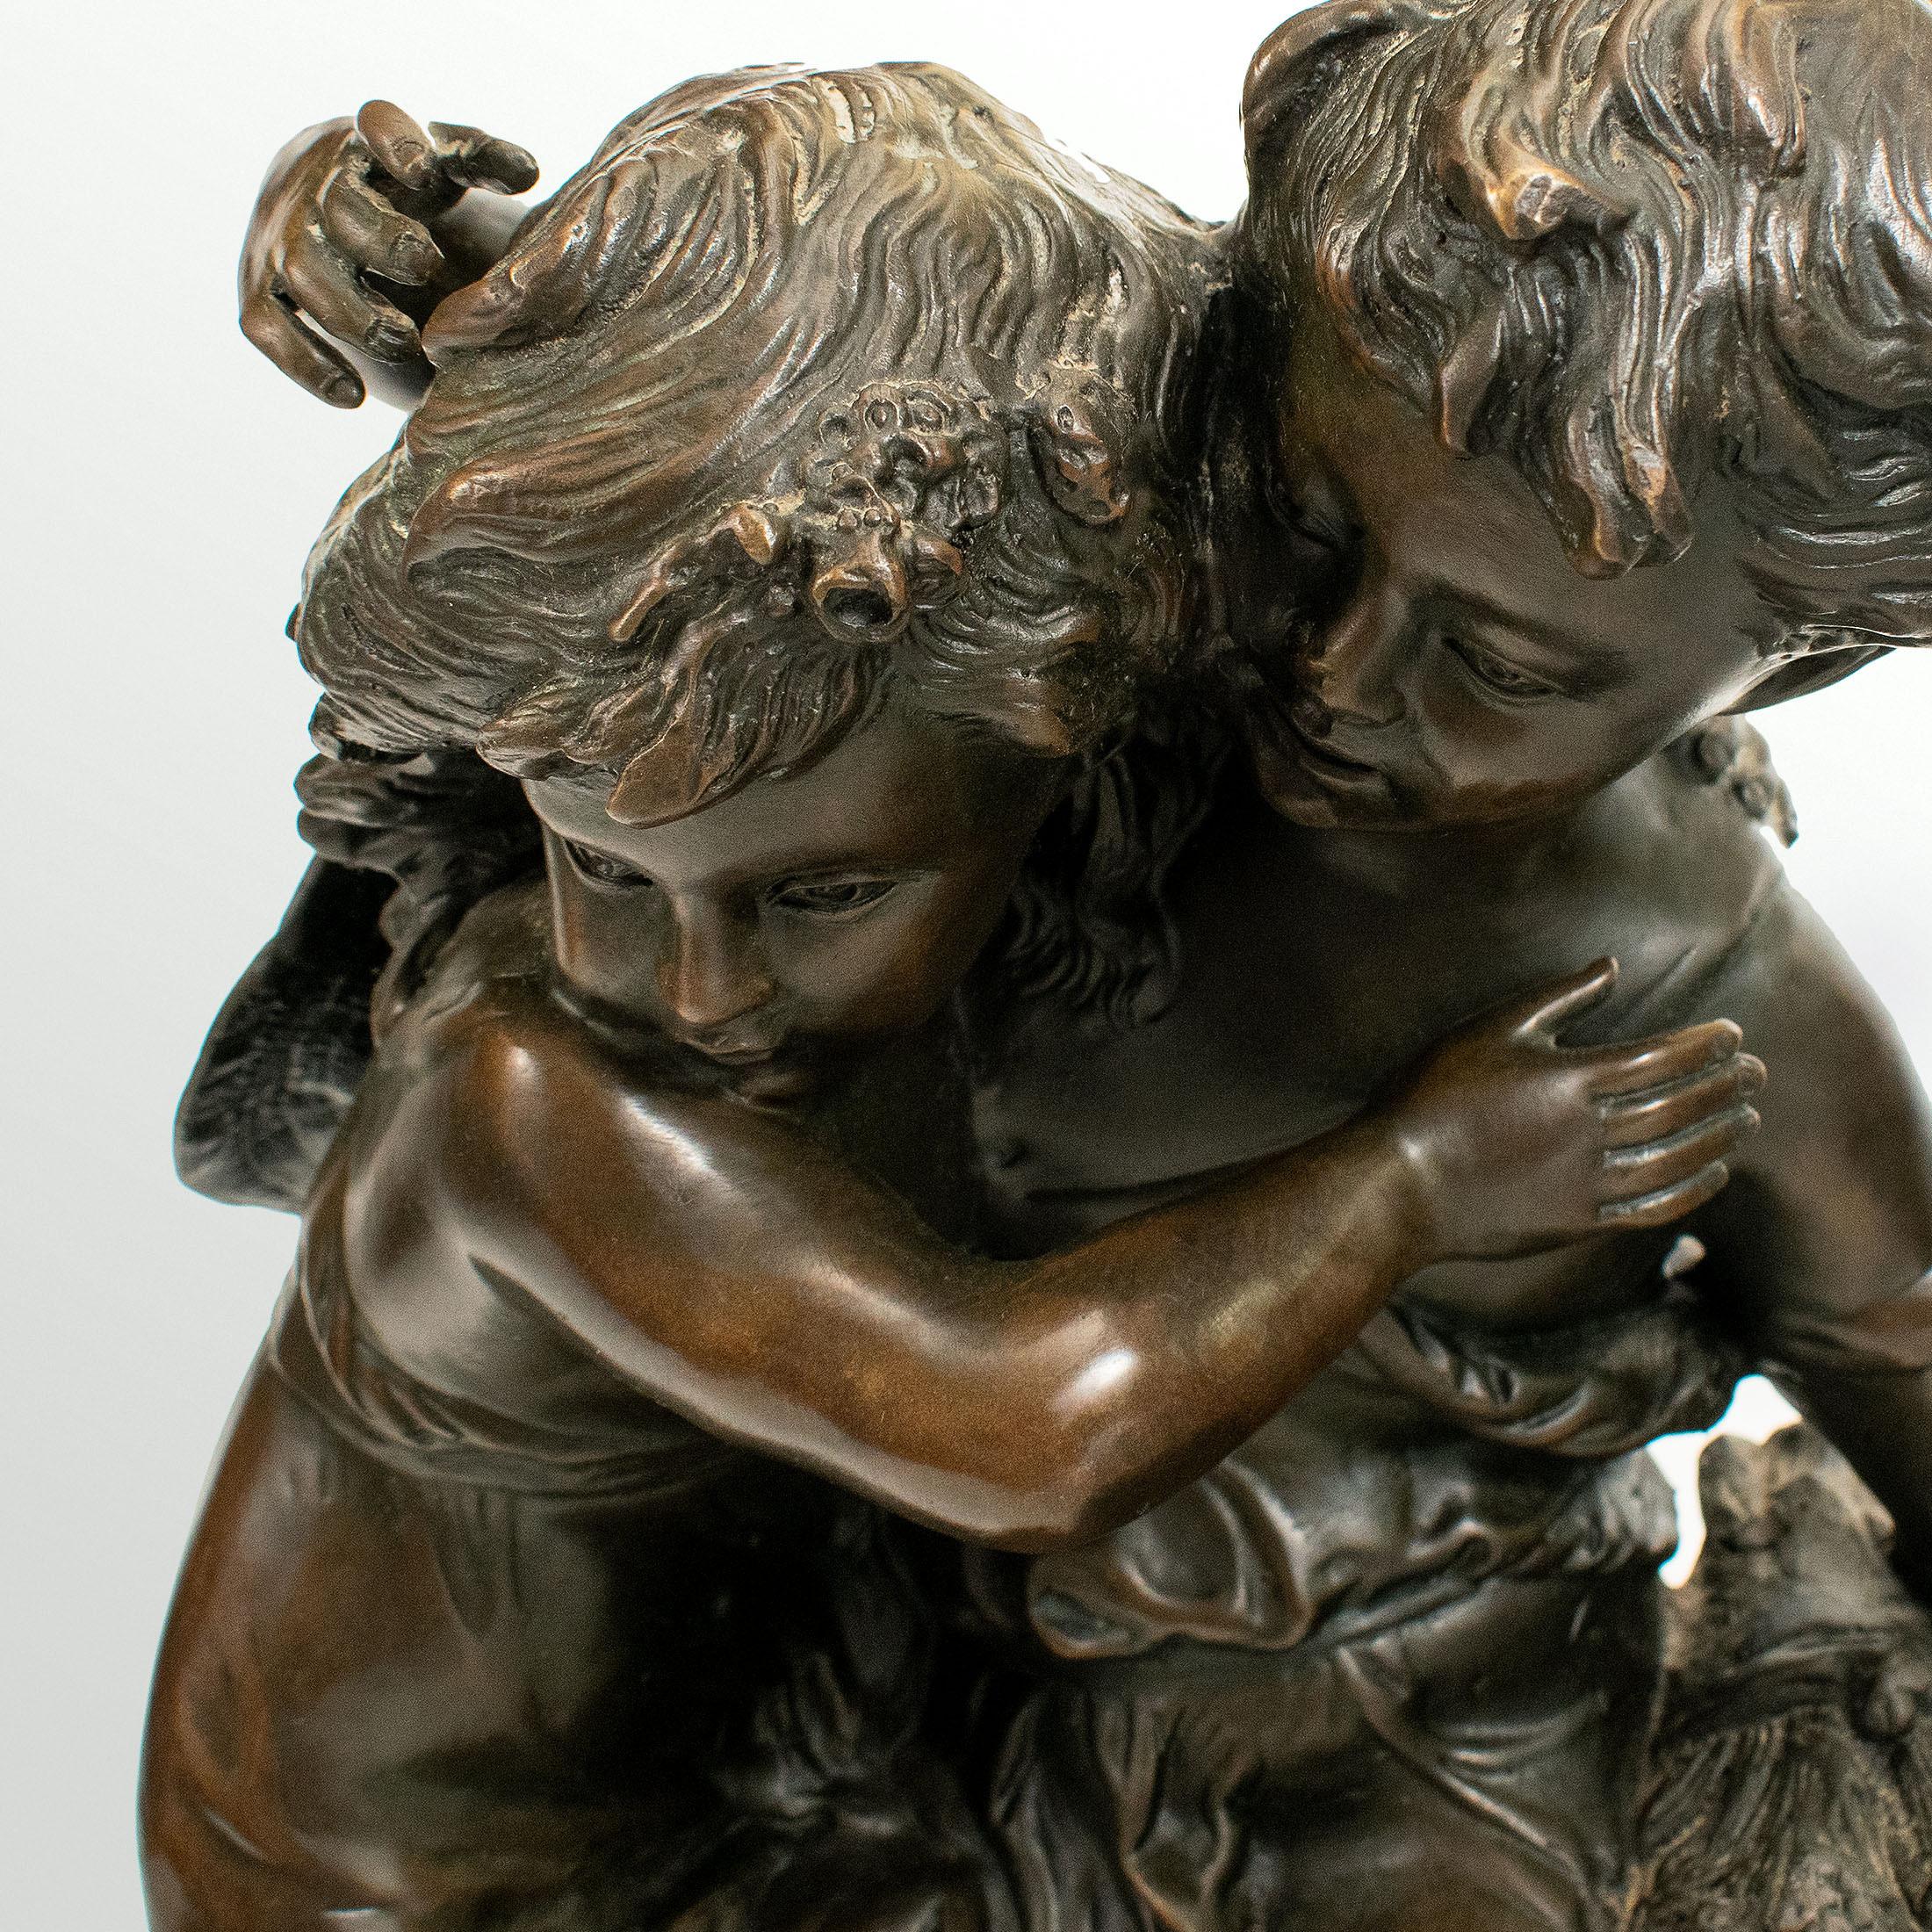 A charming bronze statue of two children carrying a bouquet of flowers, signed Auguste Moreau (1834 -1917), 42 cm x 22 cm.

Produced a short time after the death of the artist, early 20th century. This piece displays a pleasing patina.

Auguste